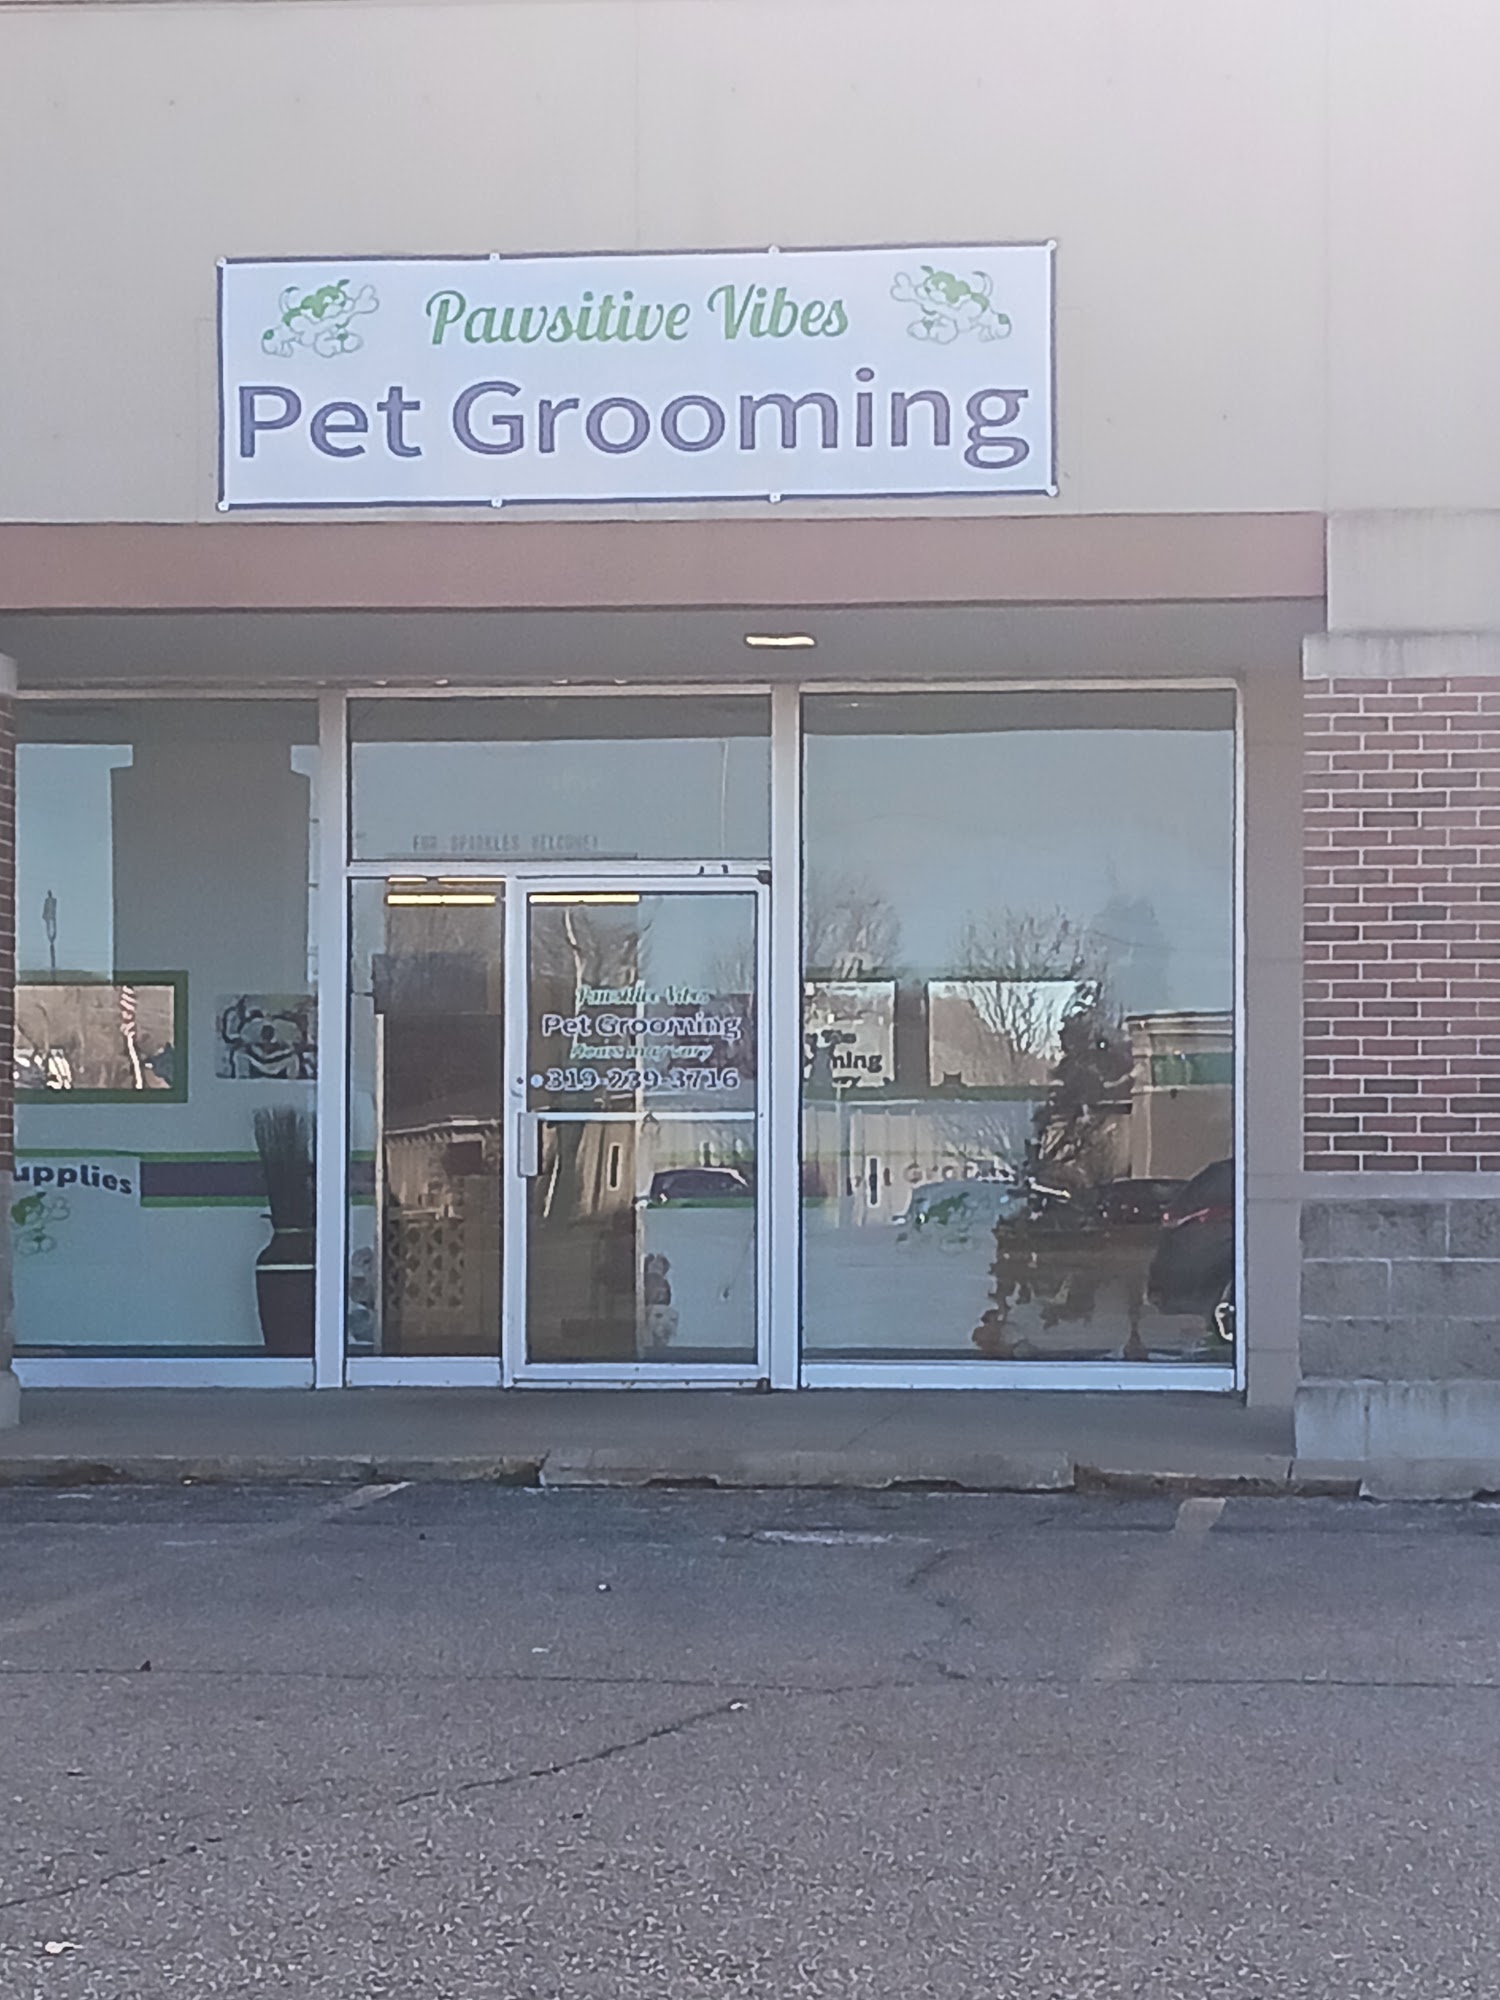 Pawsitive Vibes Pet Grooming 3566 Lafayette Rd, Evansdale Iowa 50707